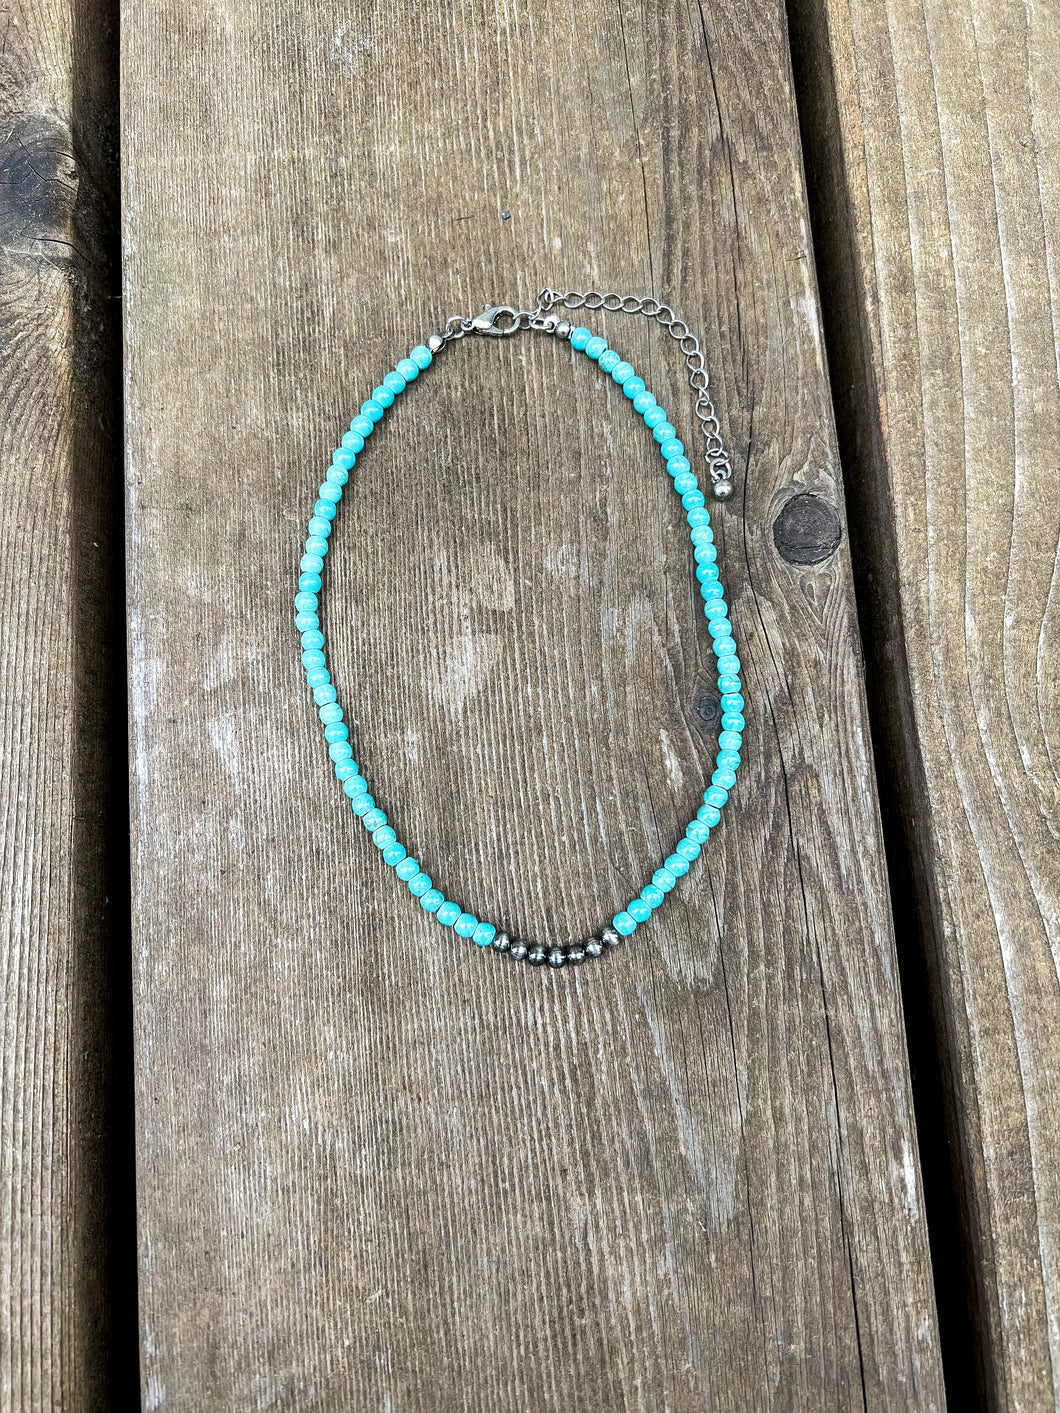 Turquoise Tequila Choker